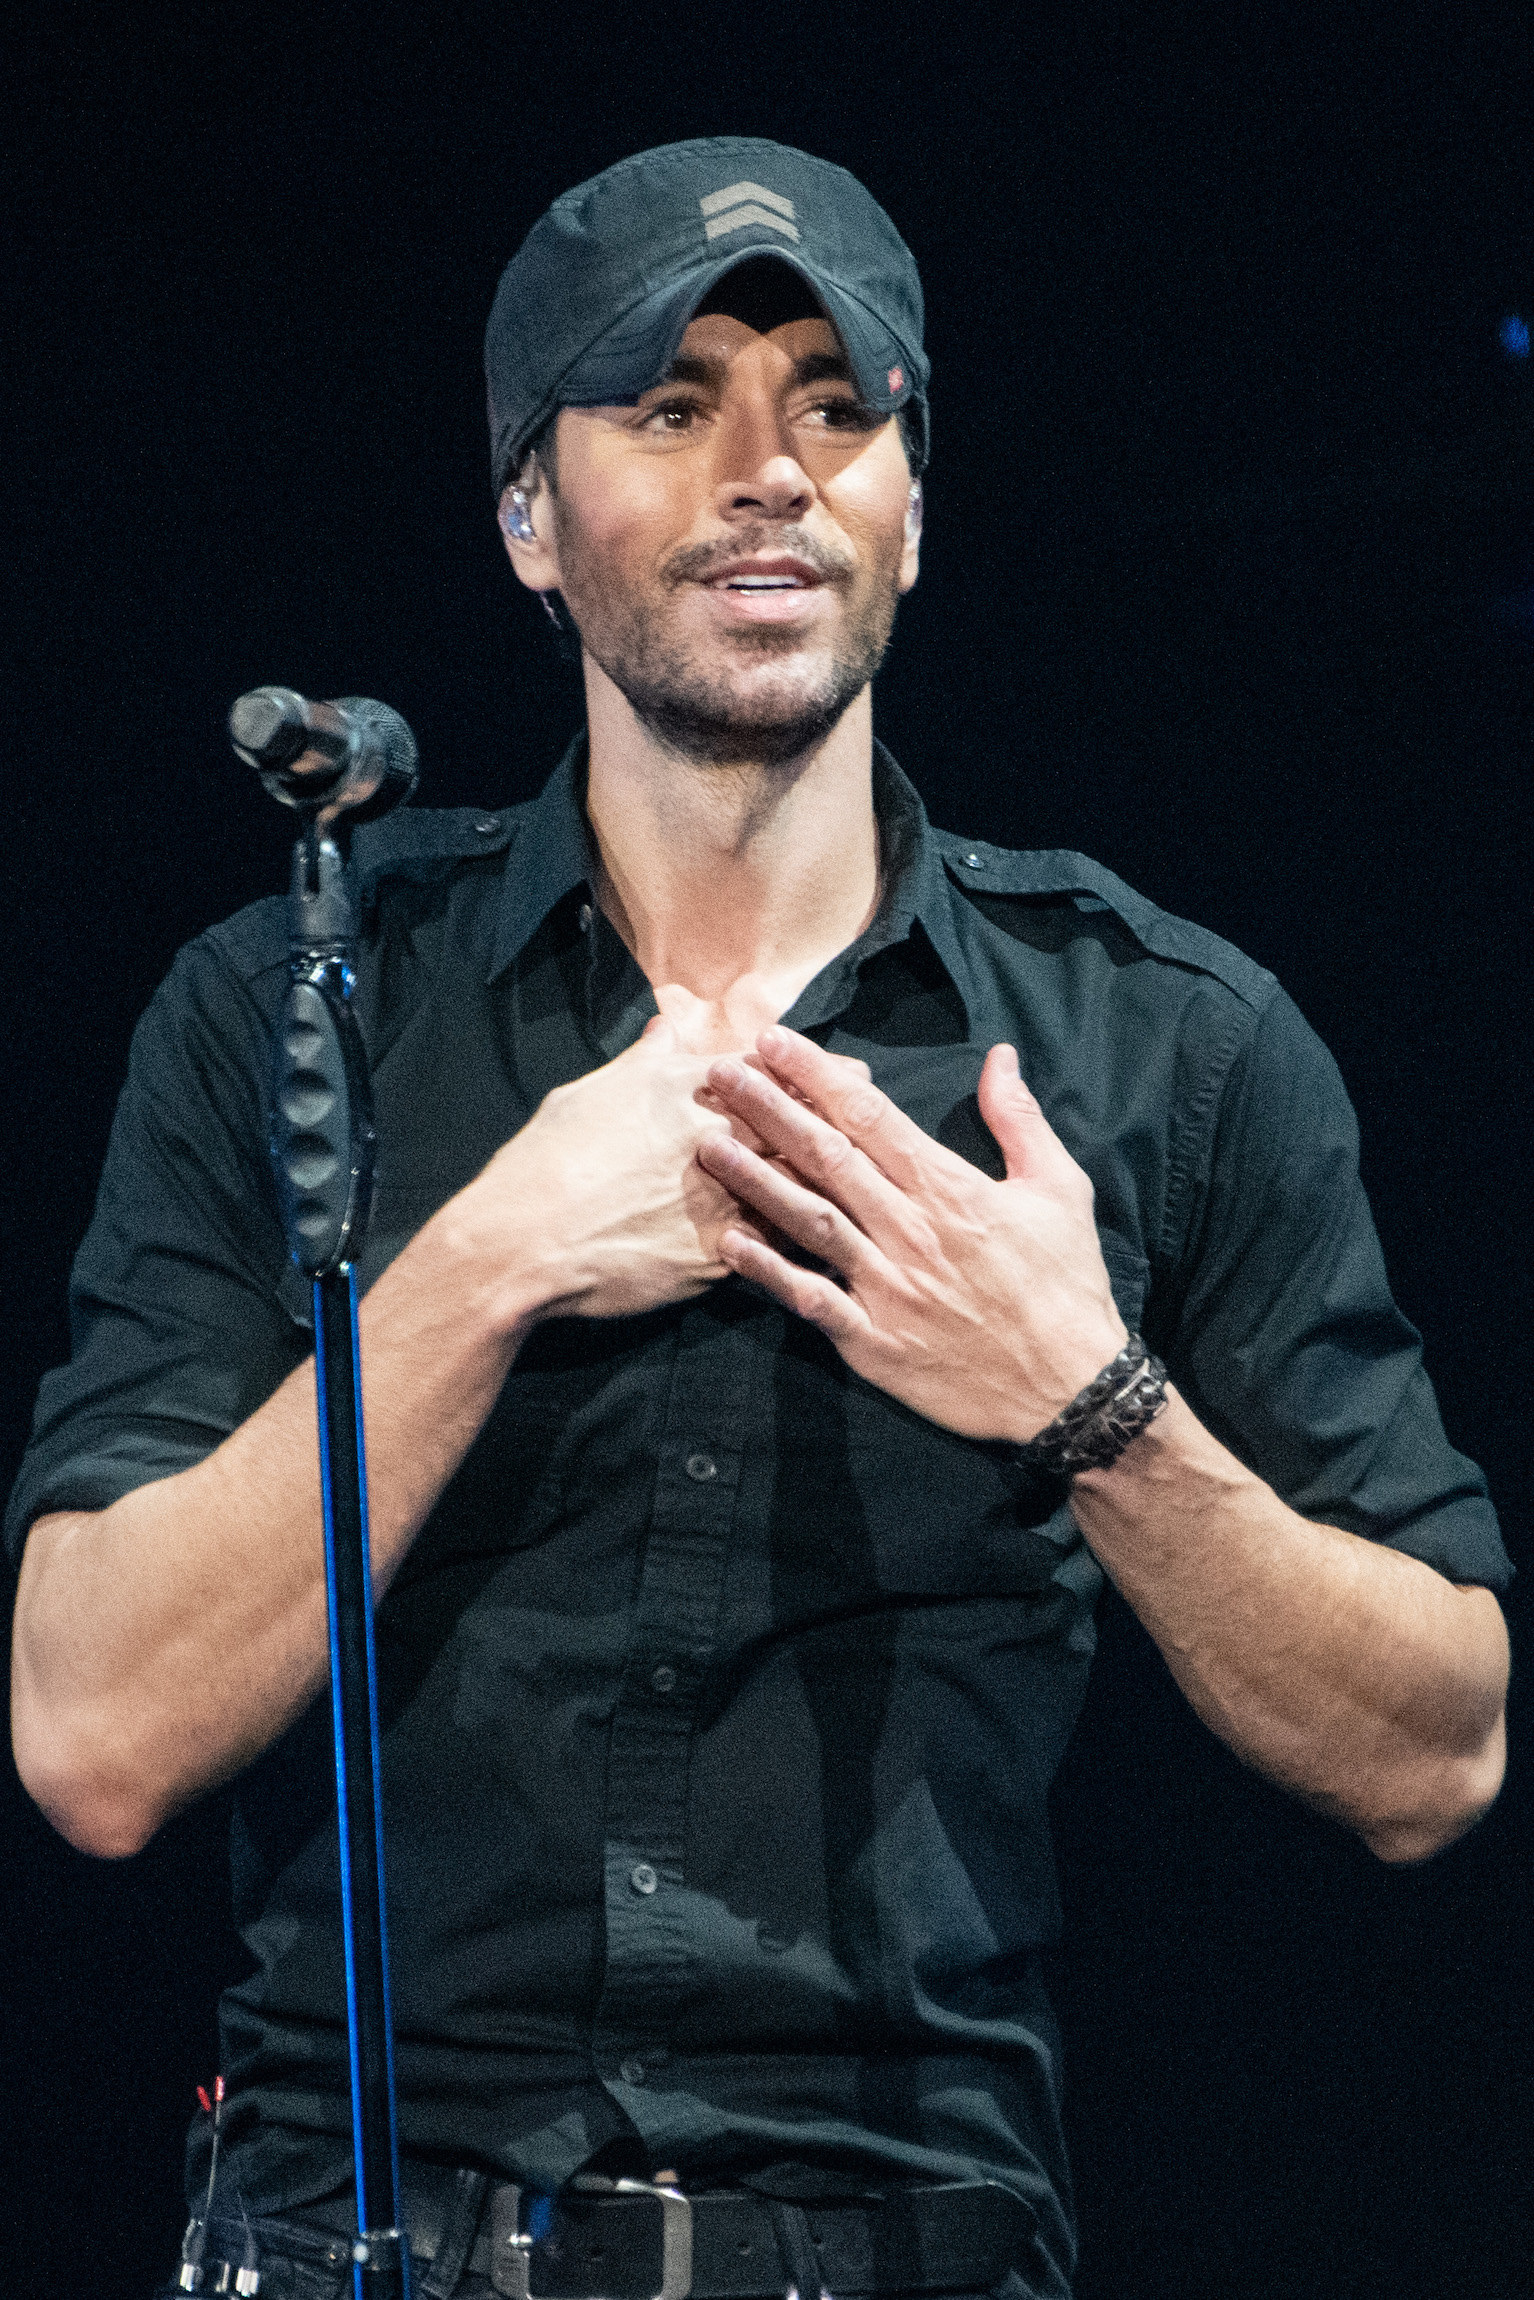 Iglesias performing on stage in 2021